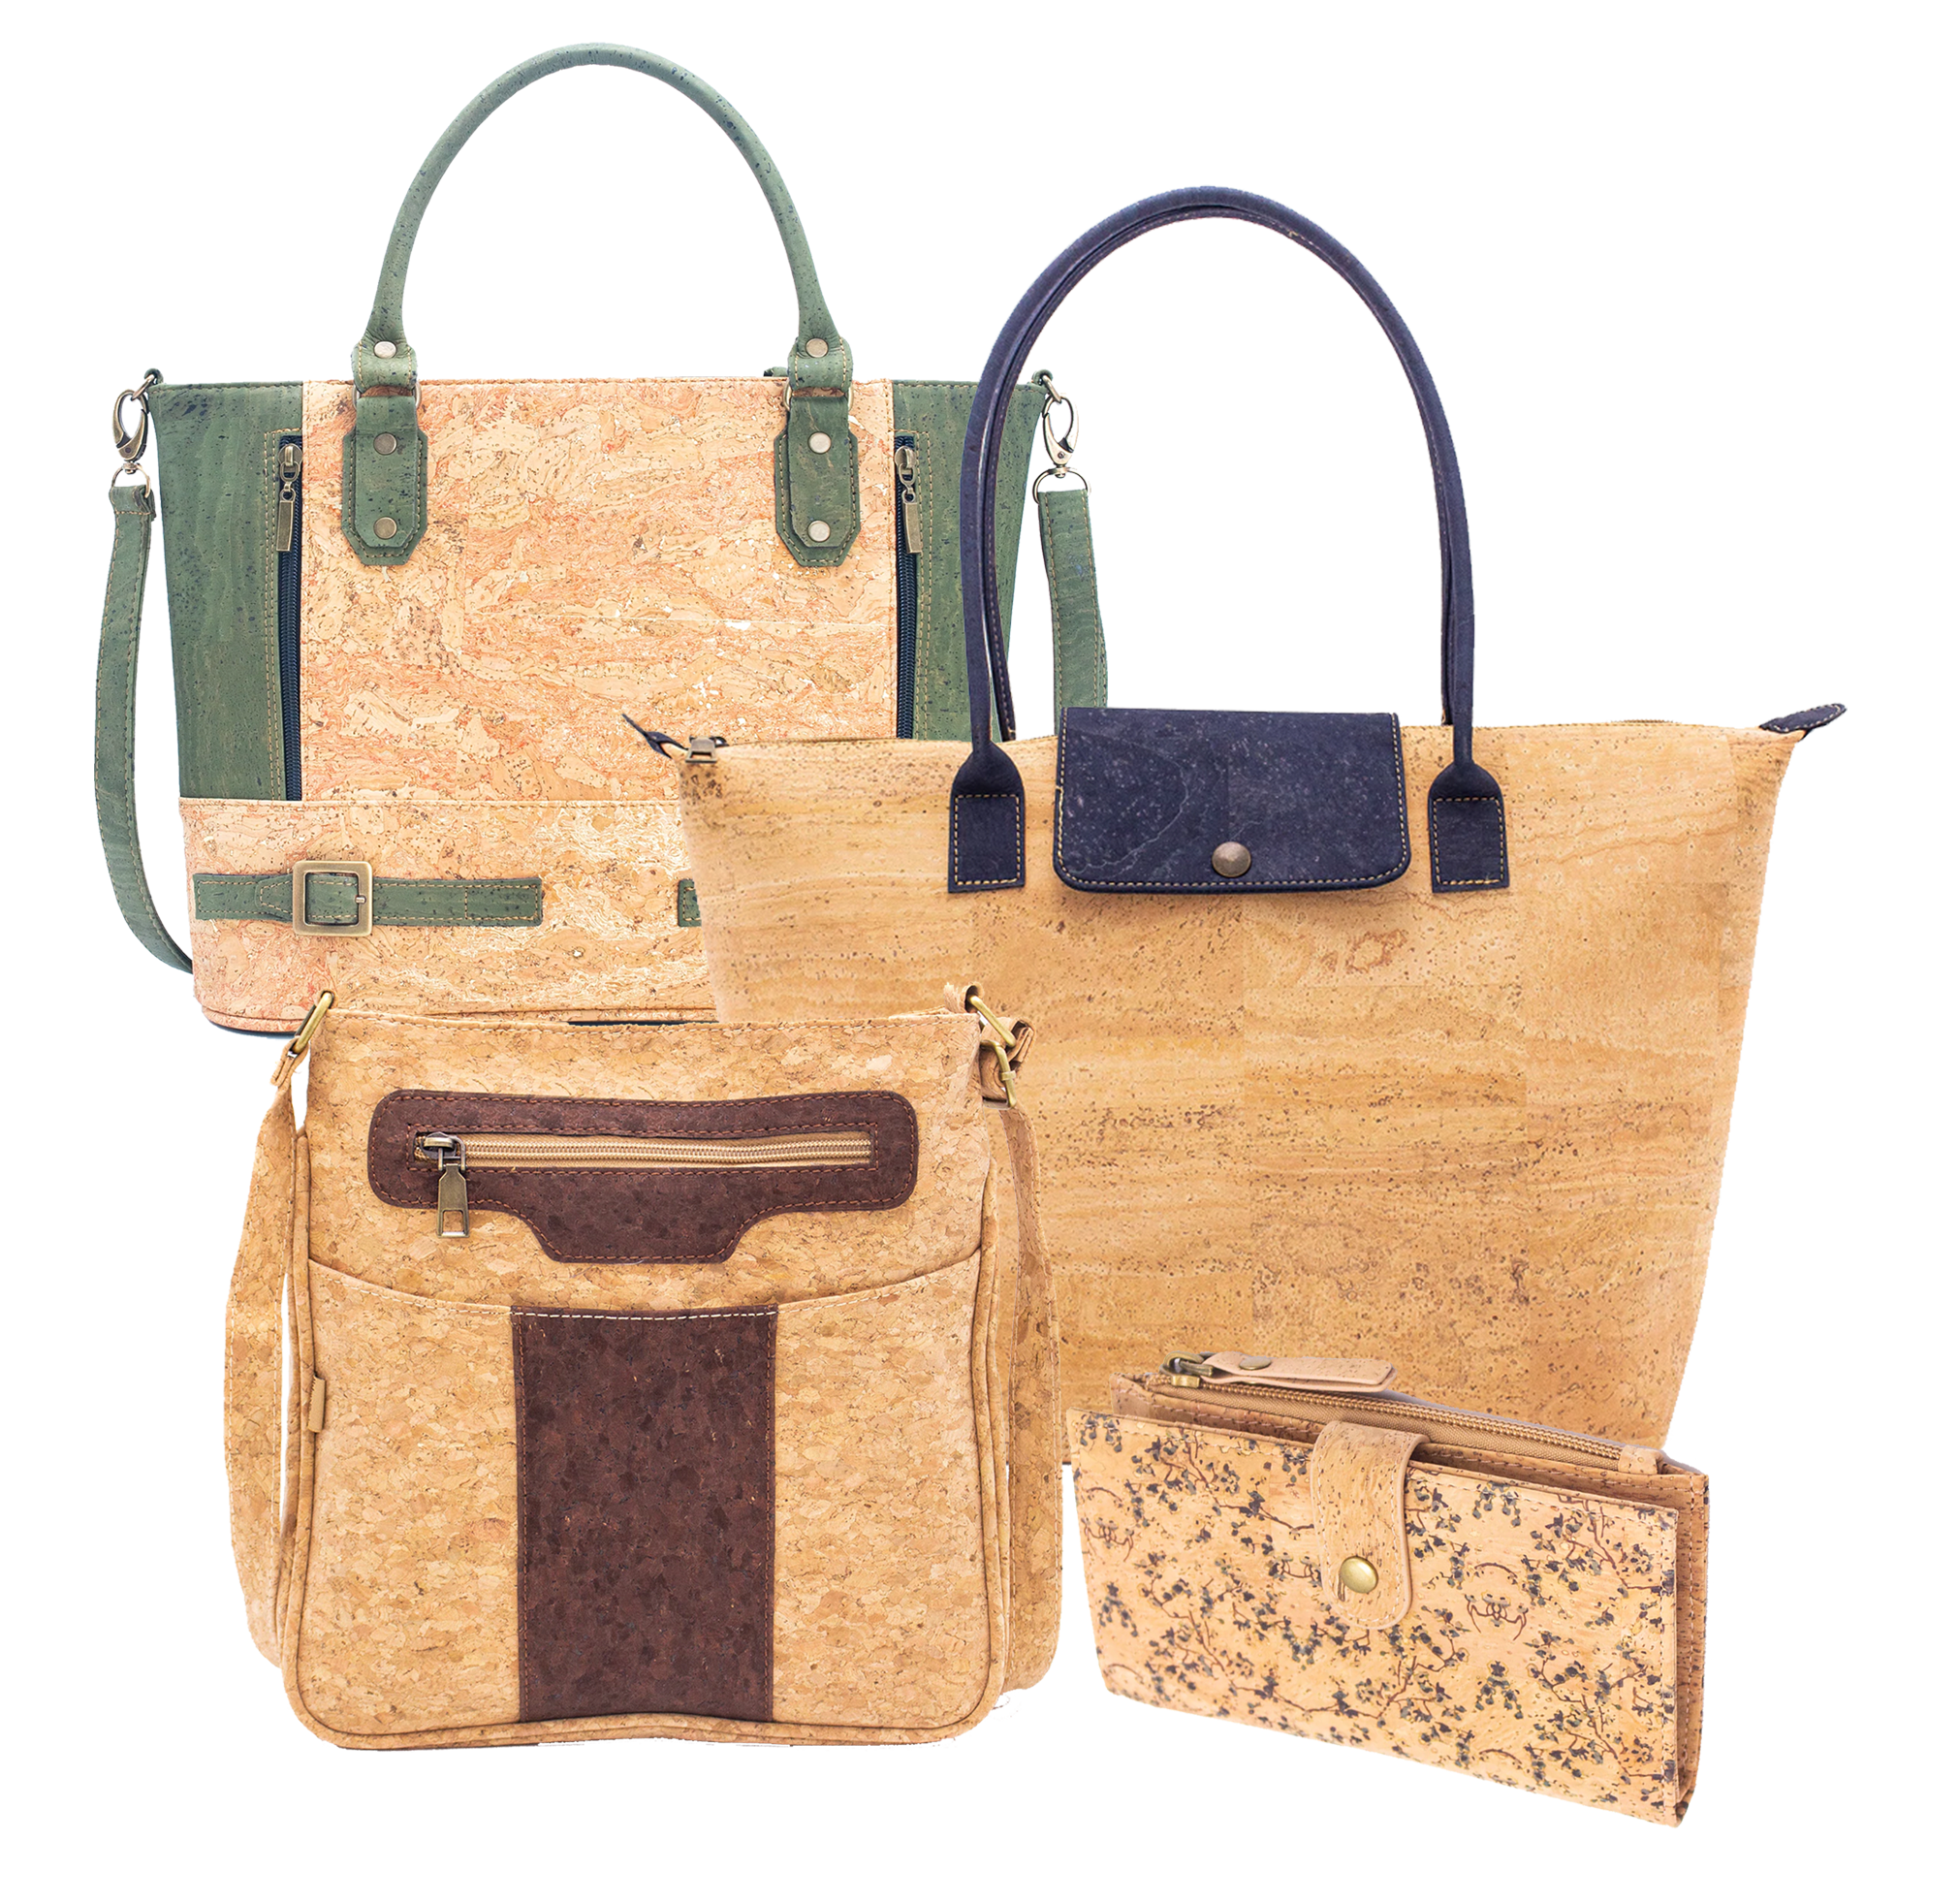 Simply Cortica - cork bags, and purses